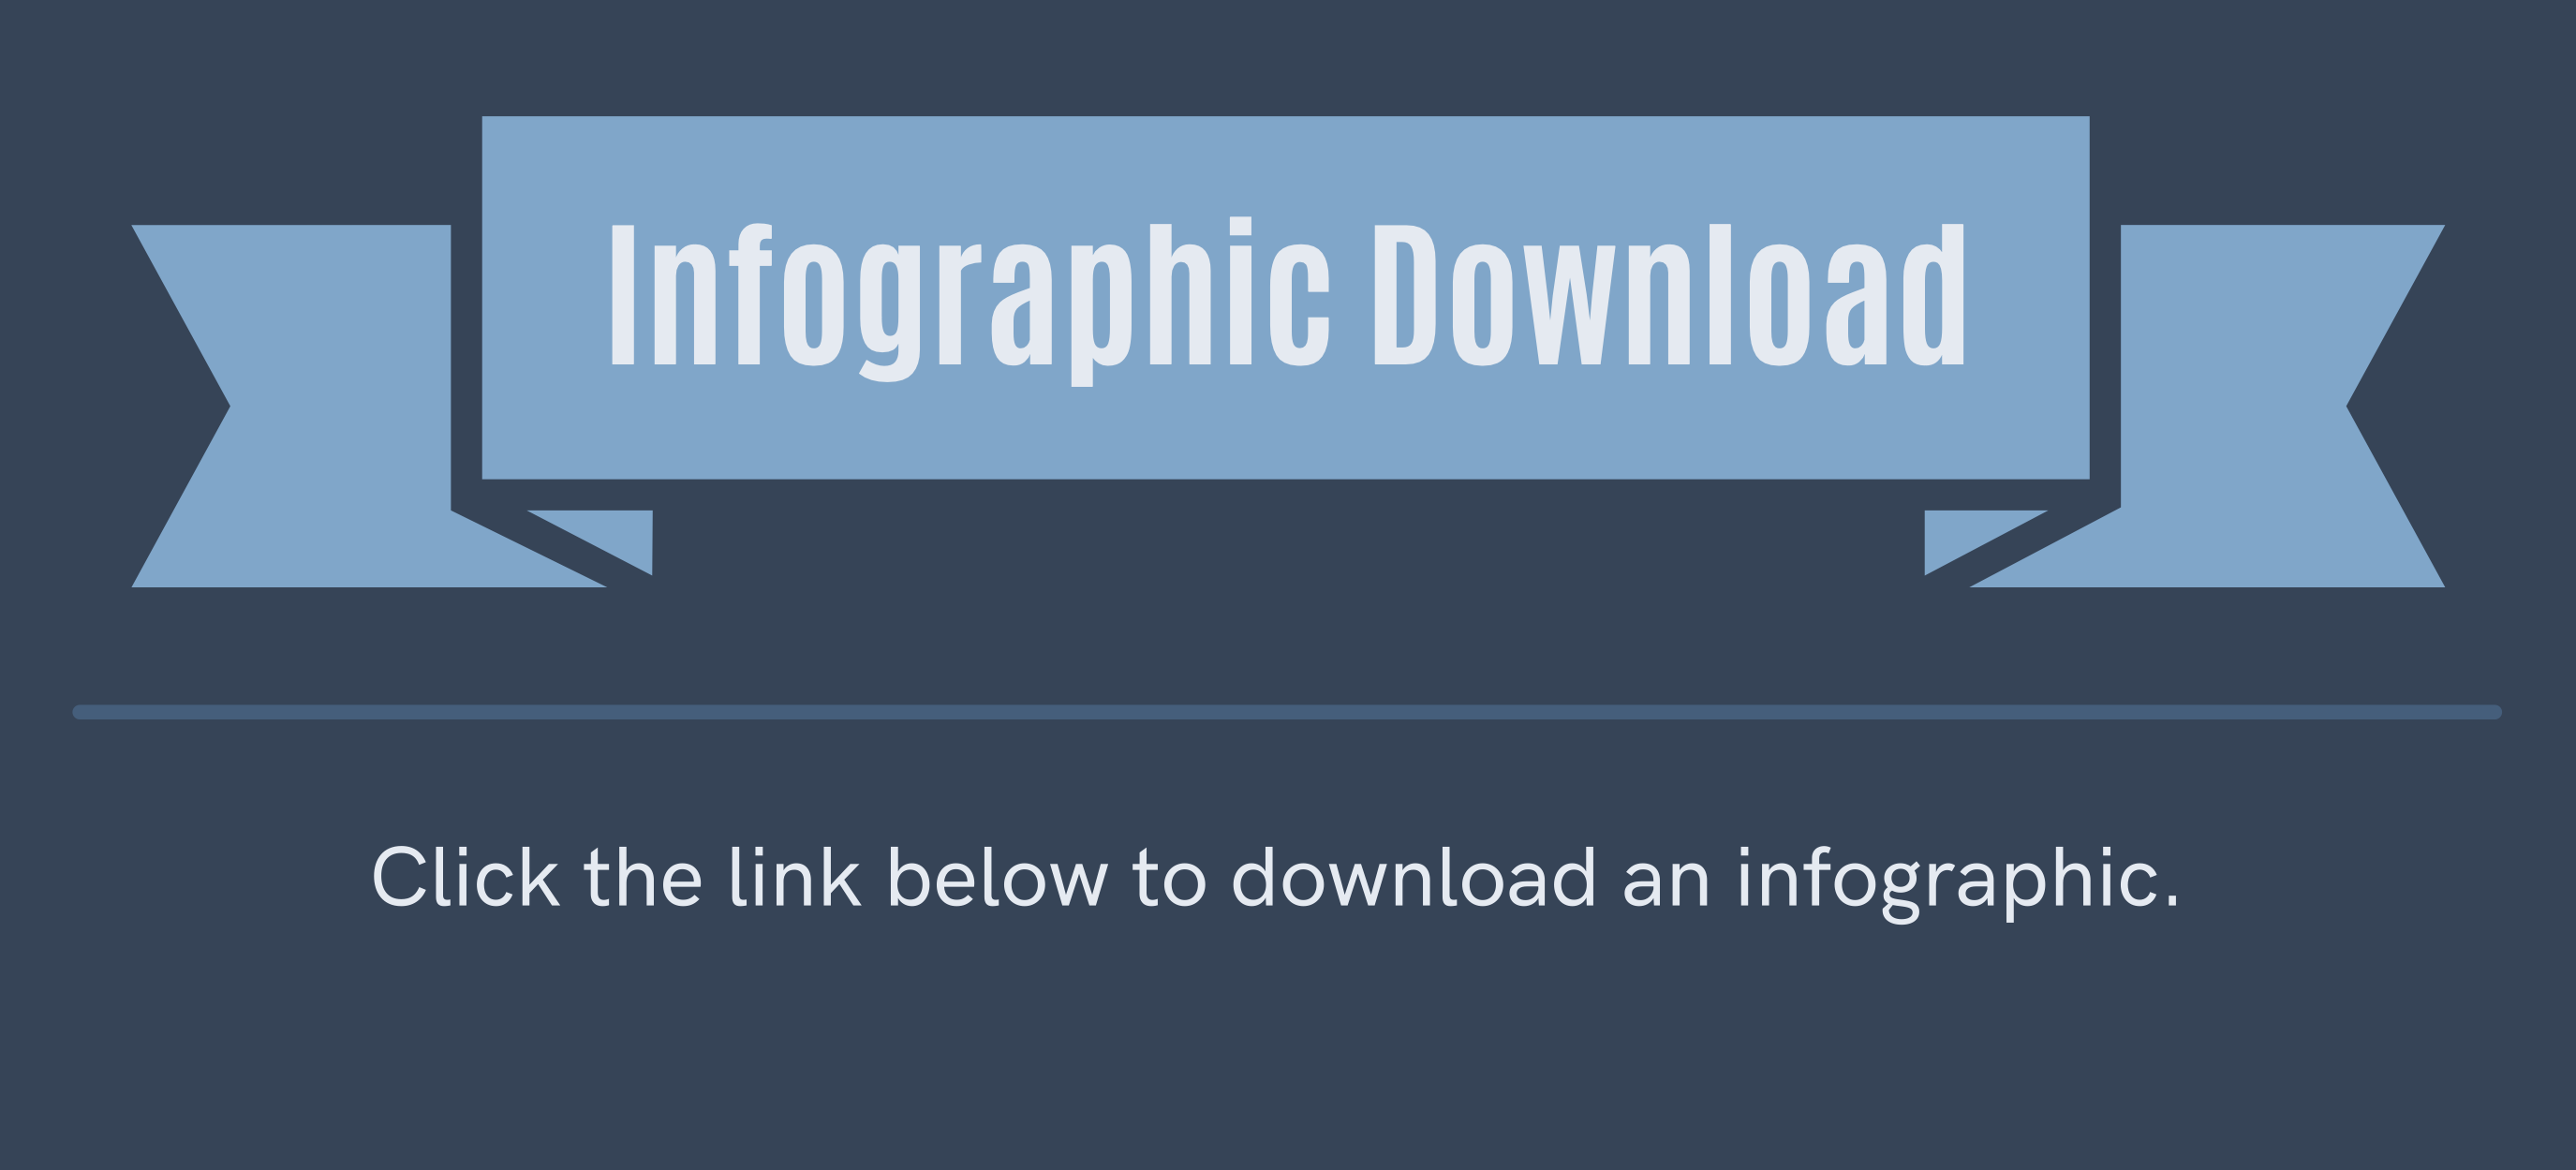 Infographic Download